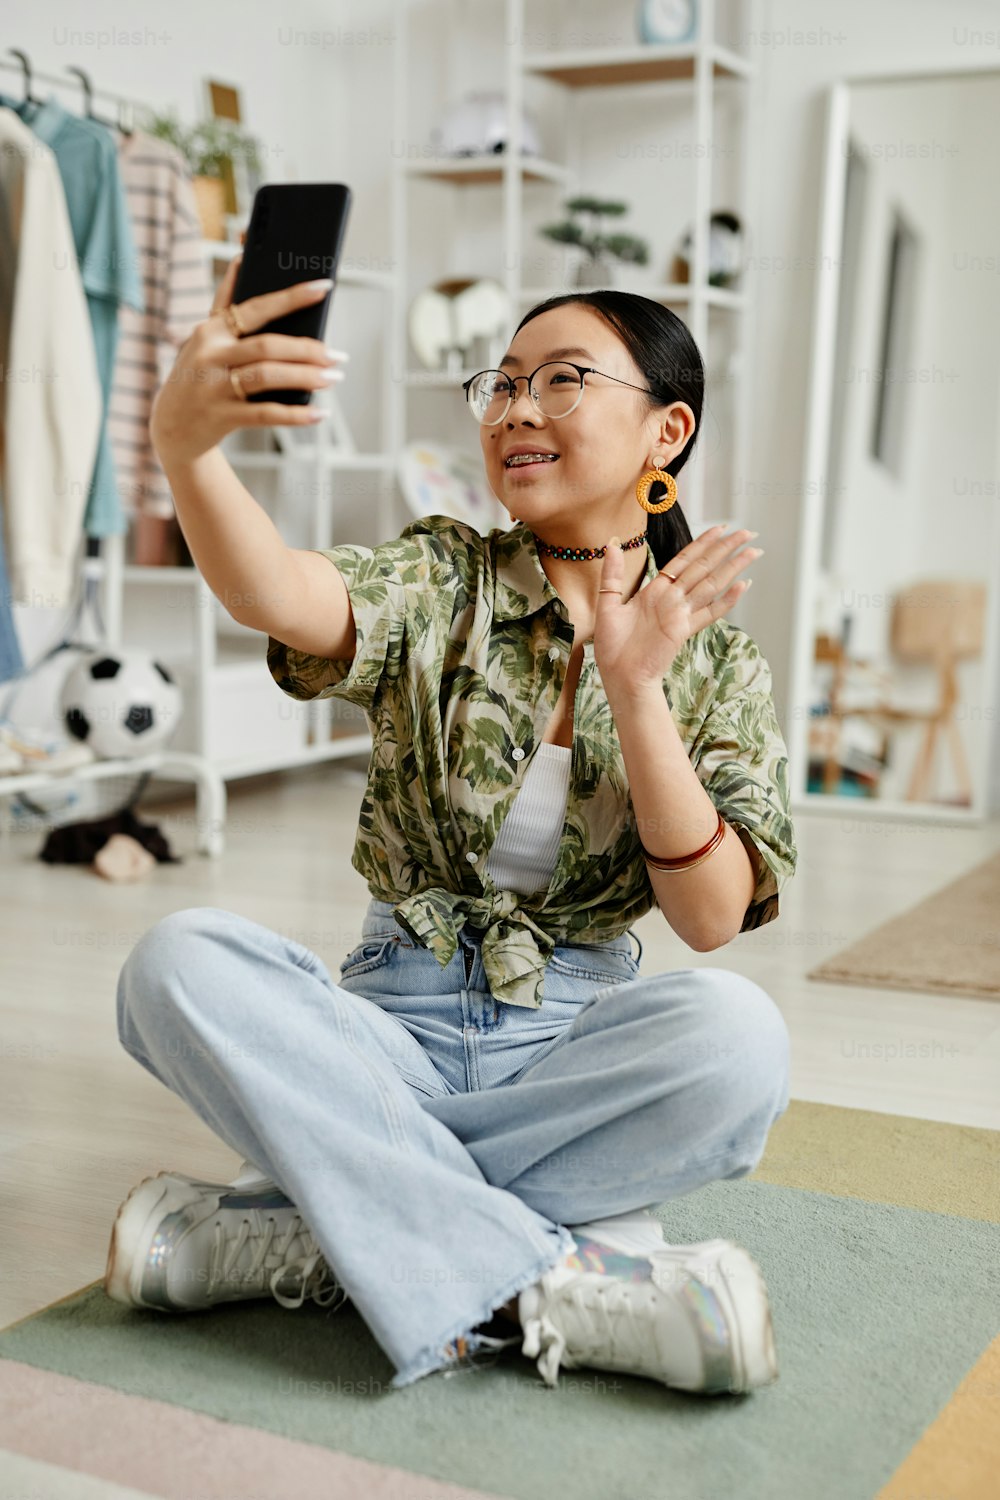 Vertical full length portrait of young teenage girl filming story for social media while sitting on floor at home